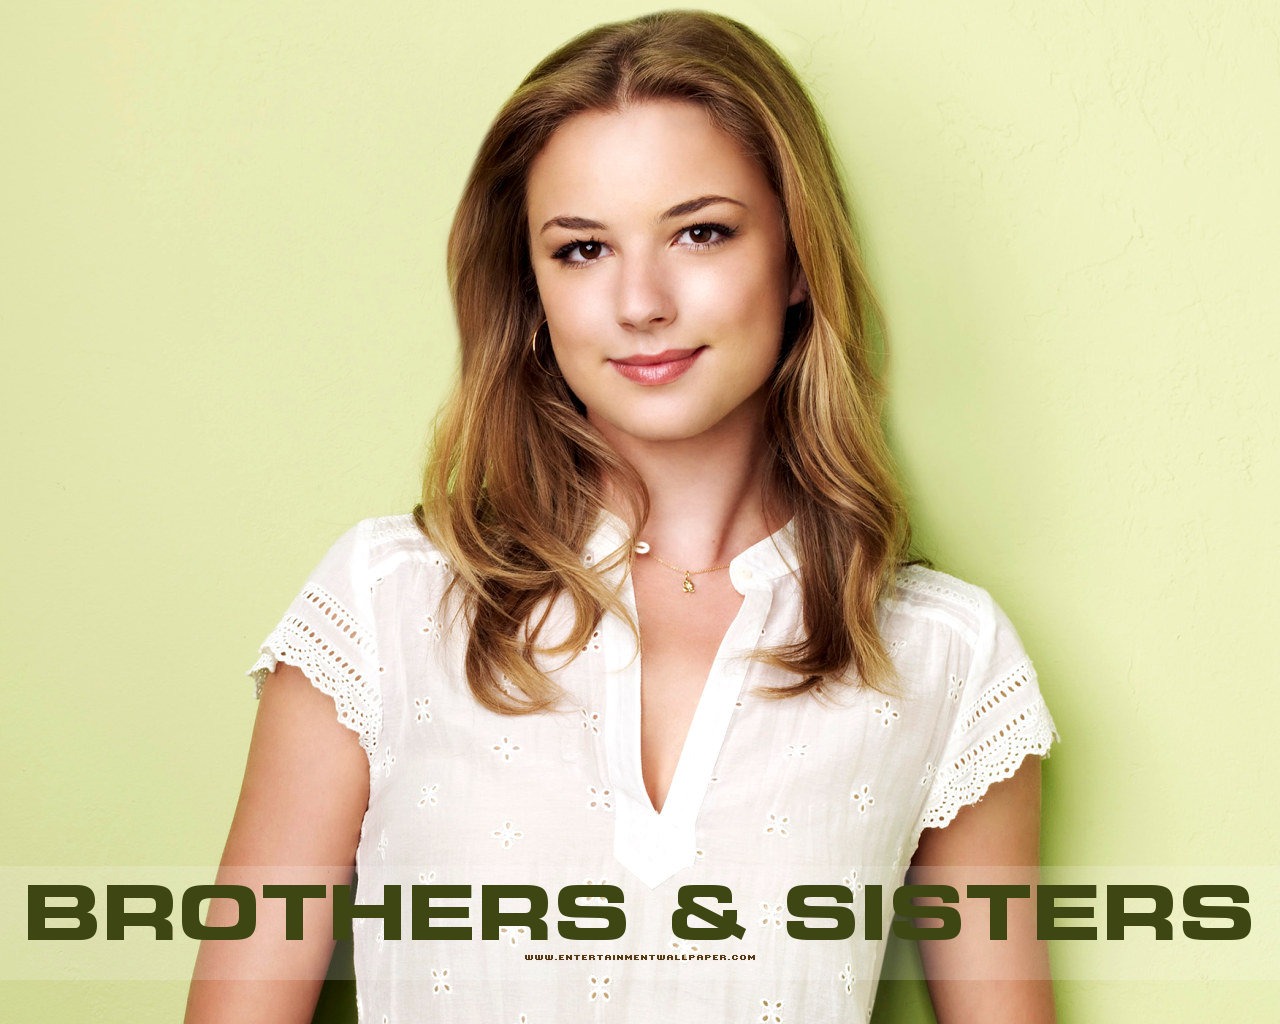 Brothers & Sisters 兄弟姐妹15 - 1280x1024